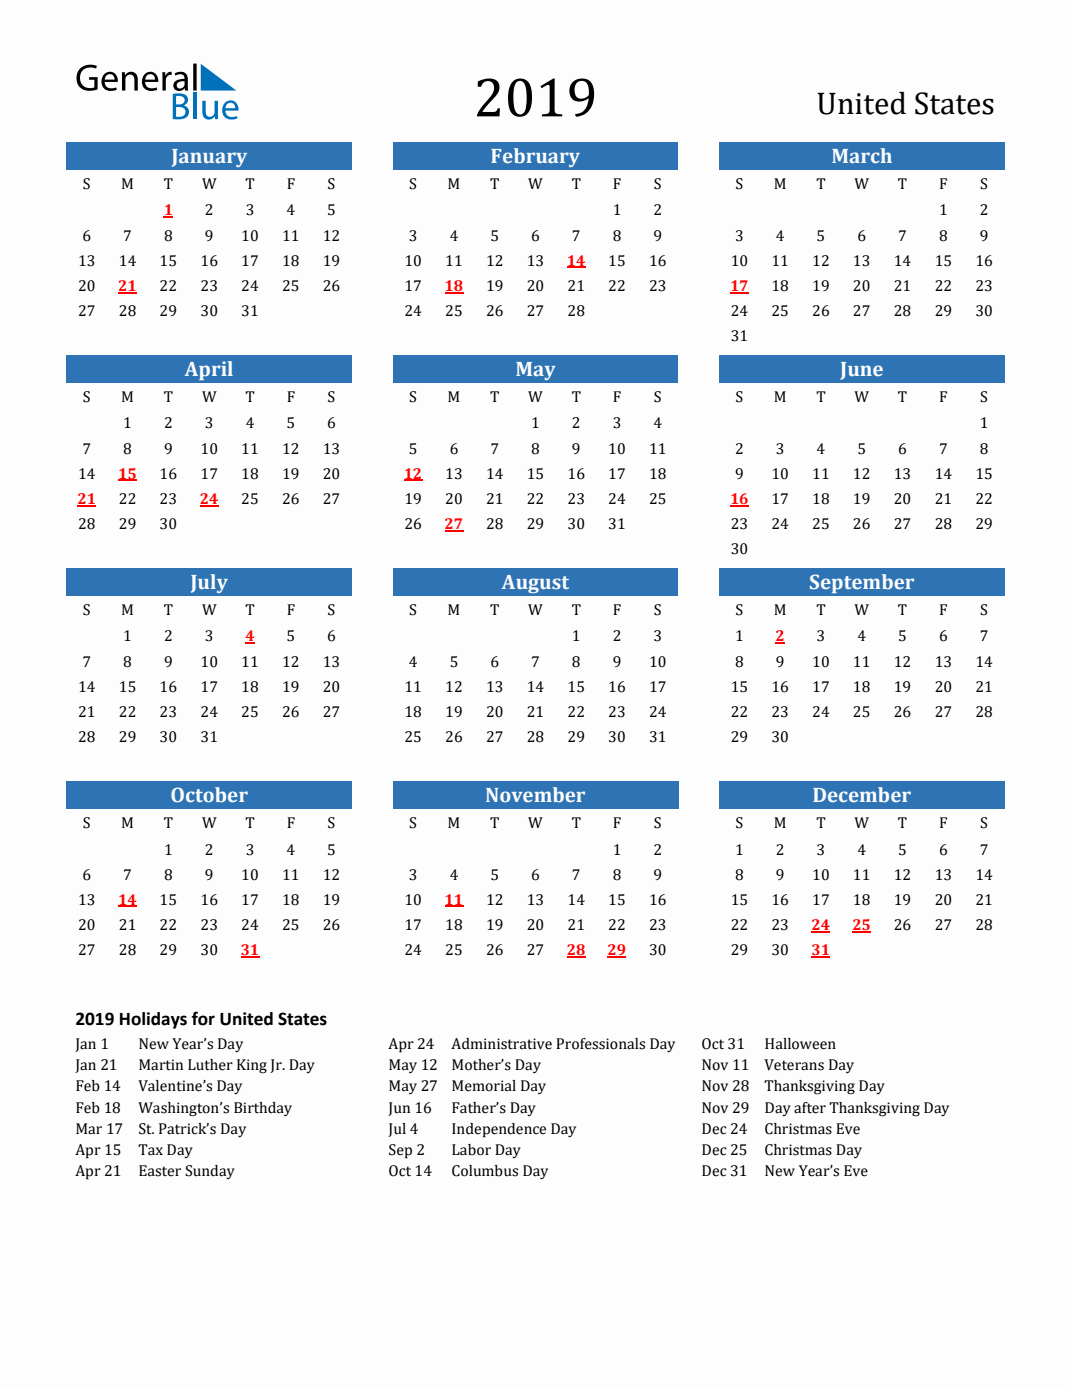 2019-united-states-calendar-with-holidays